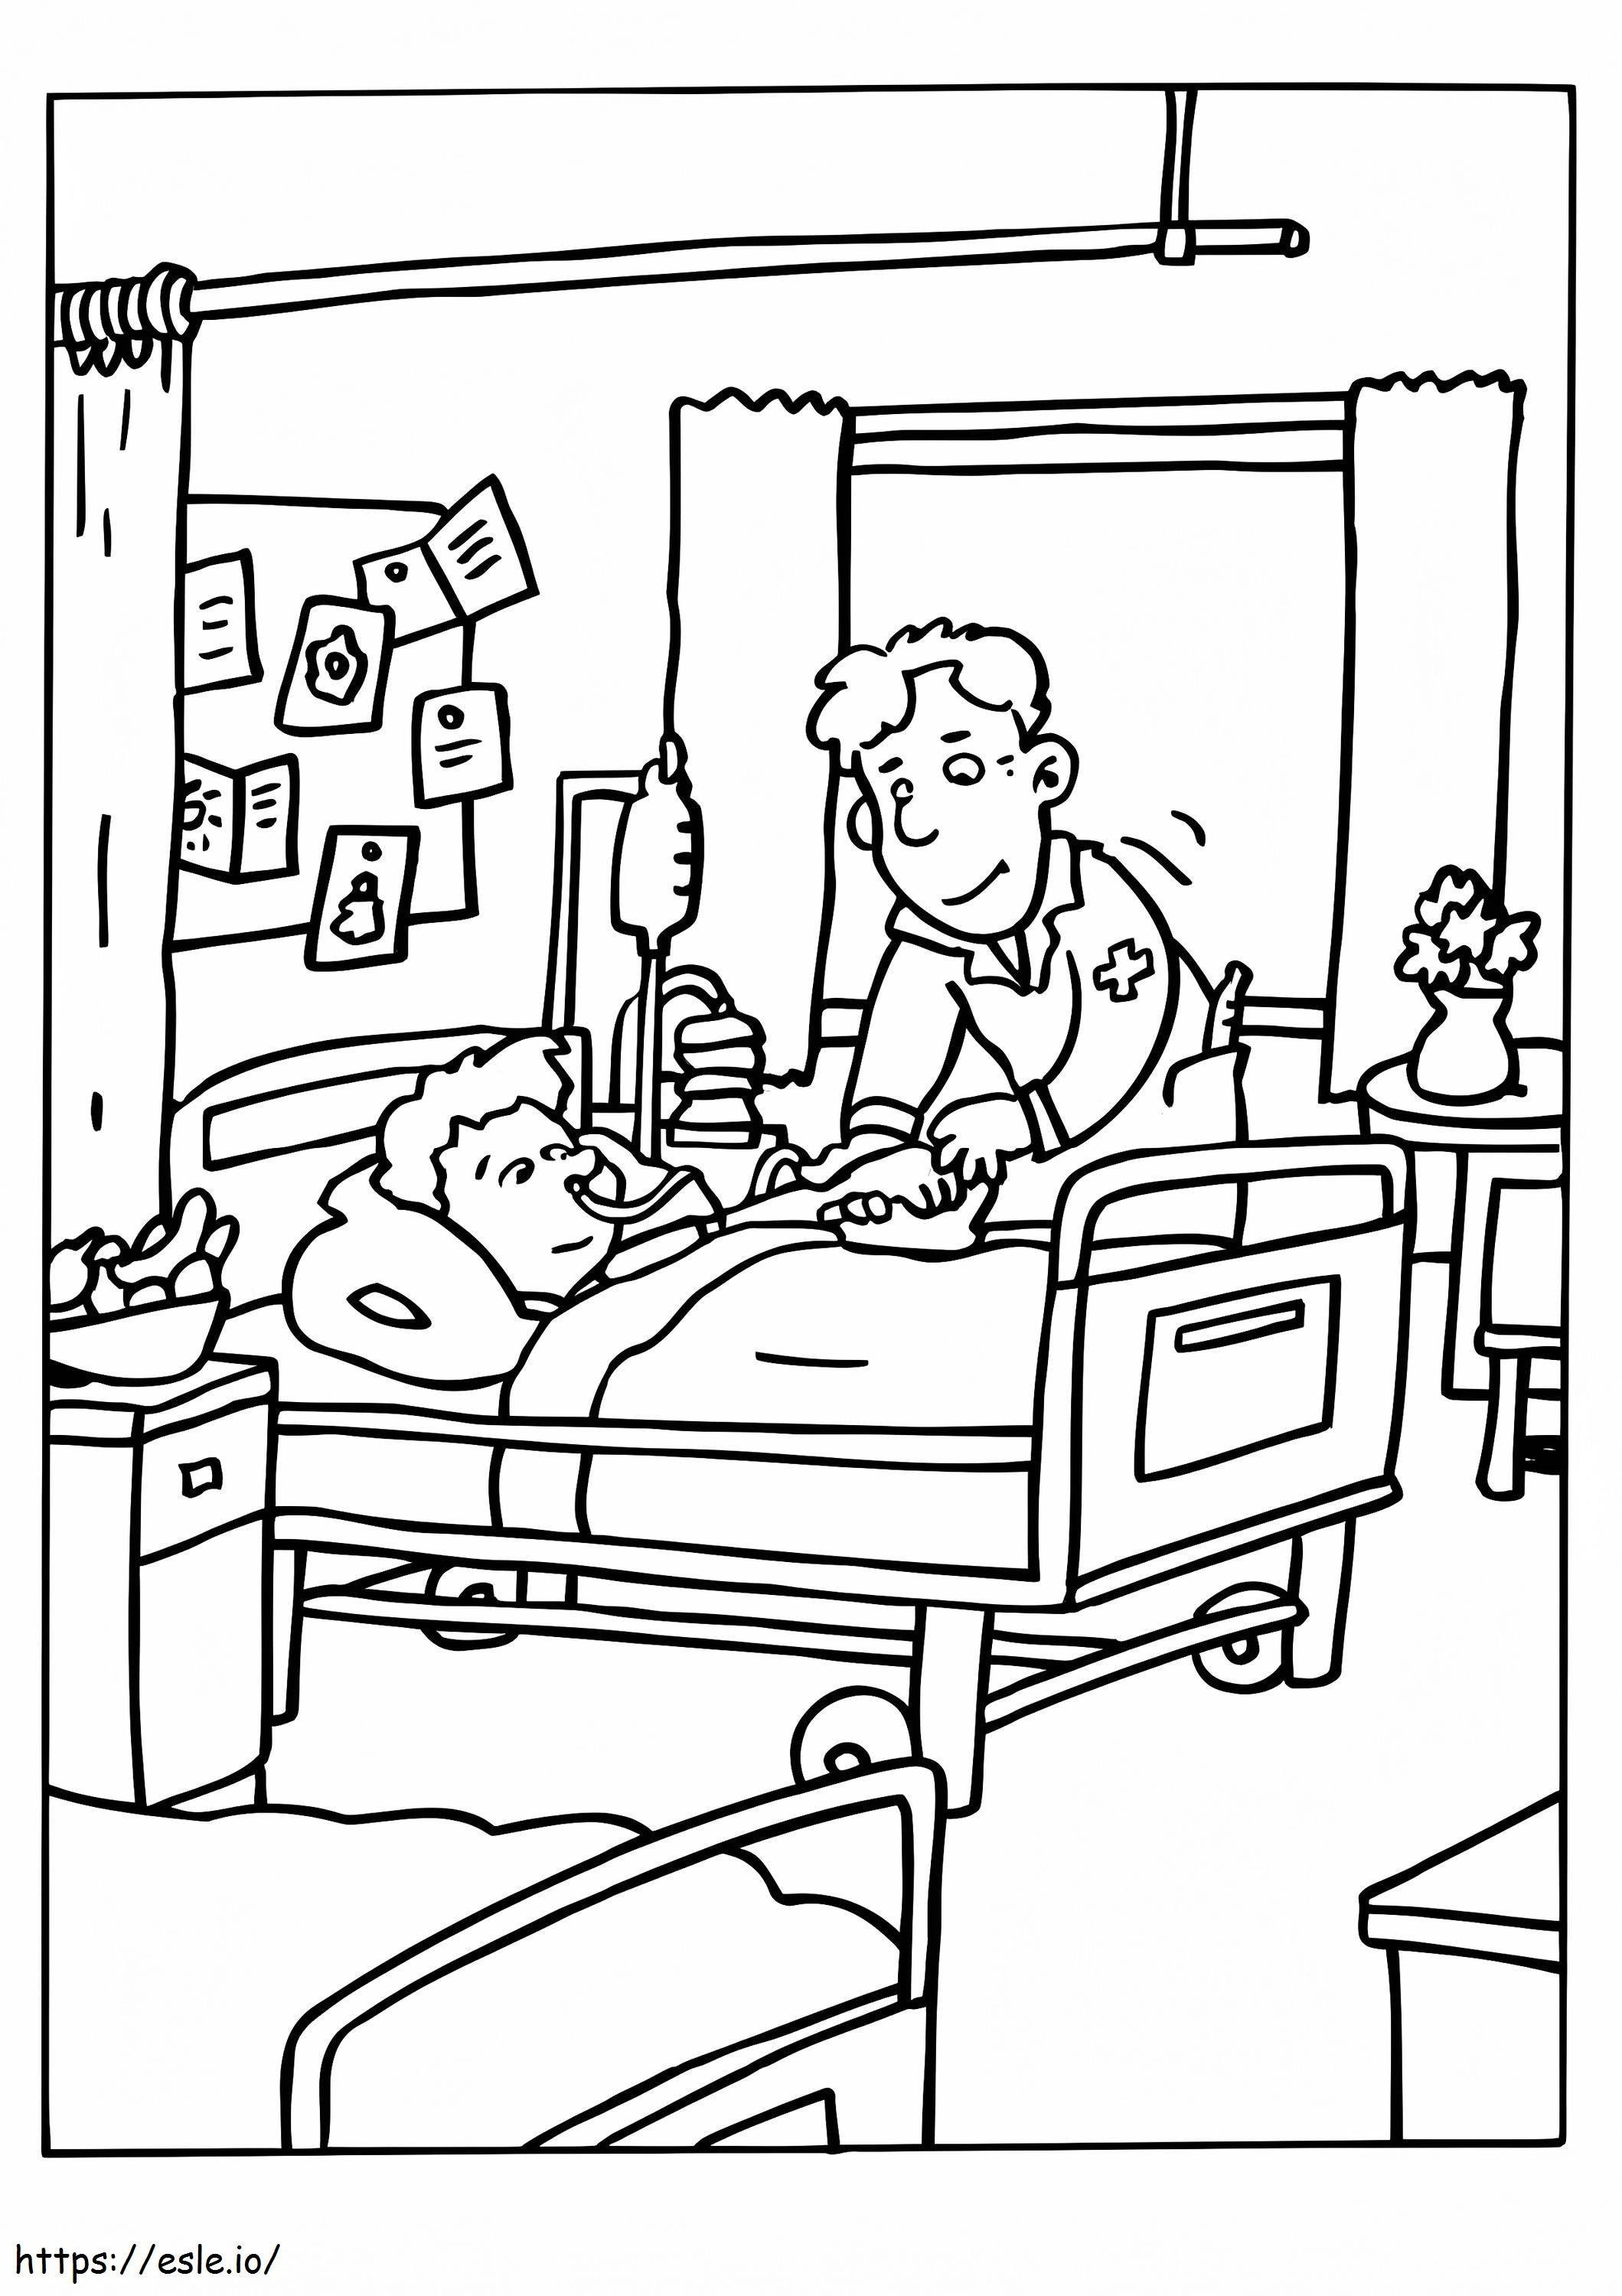 Little Boy In Hospital coloring page